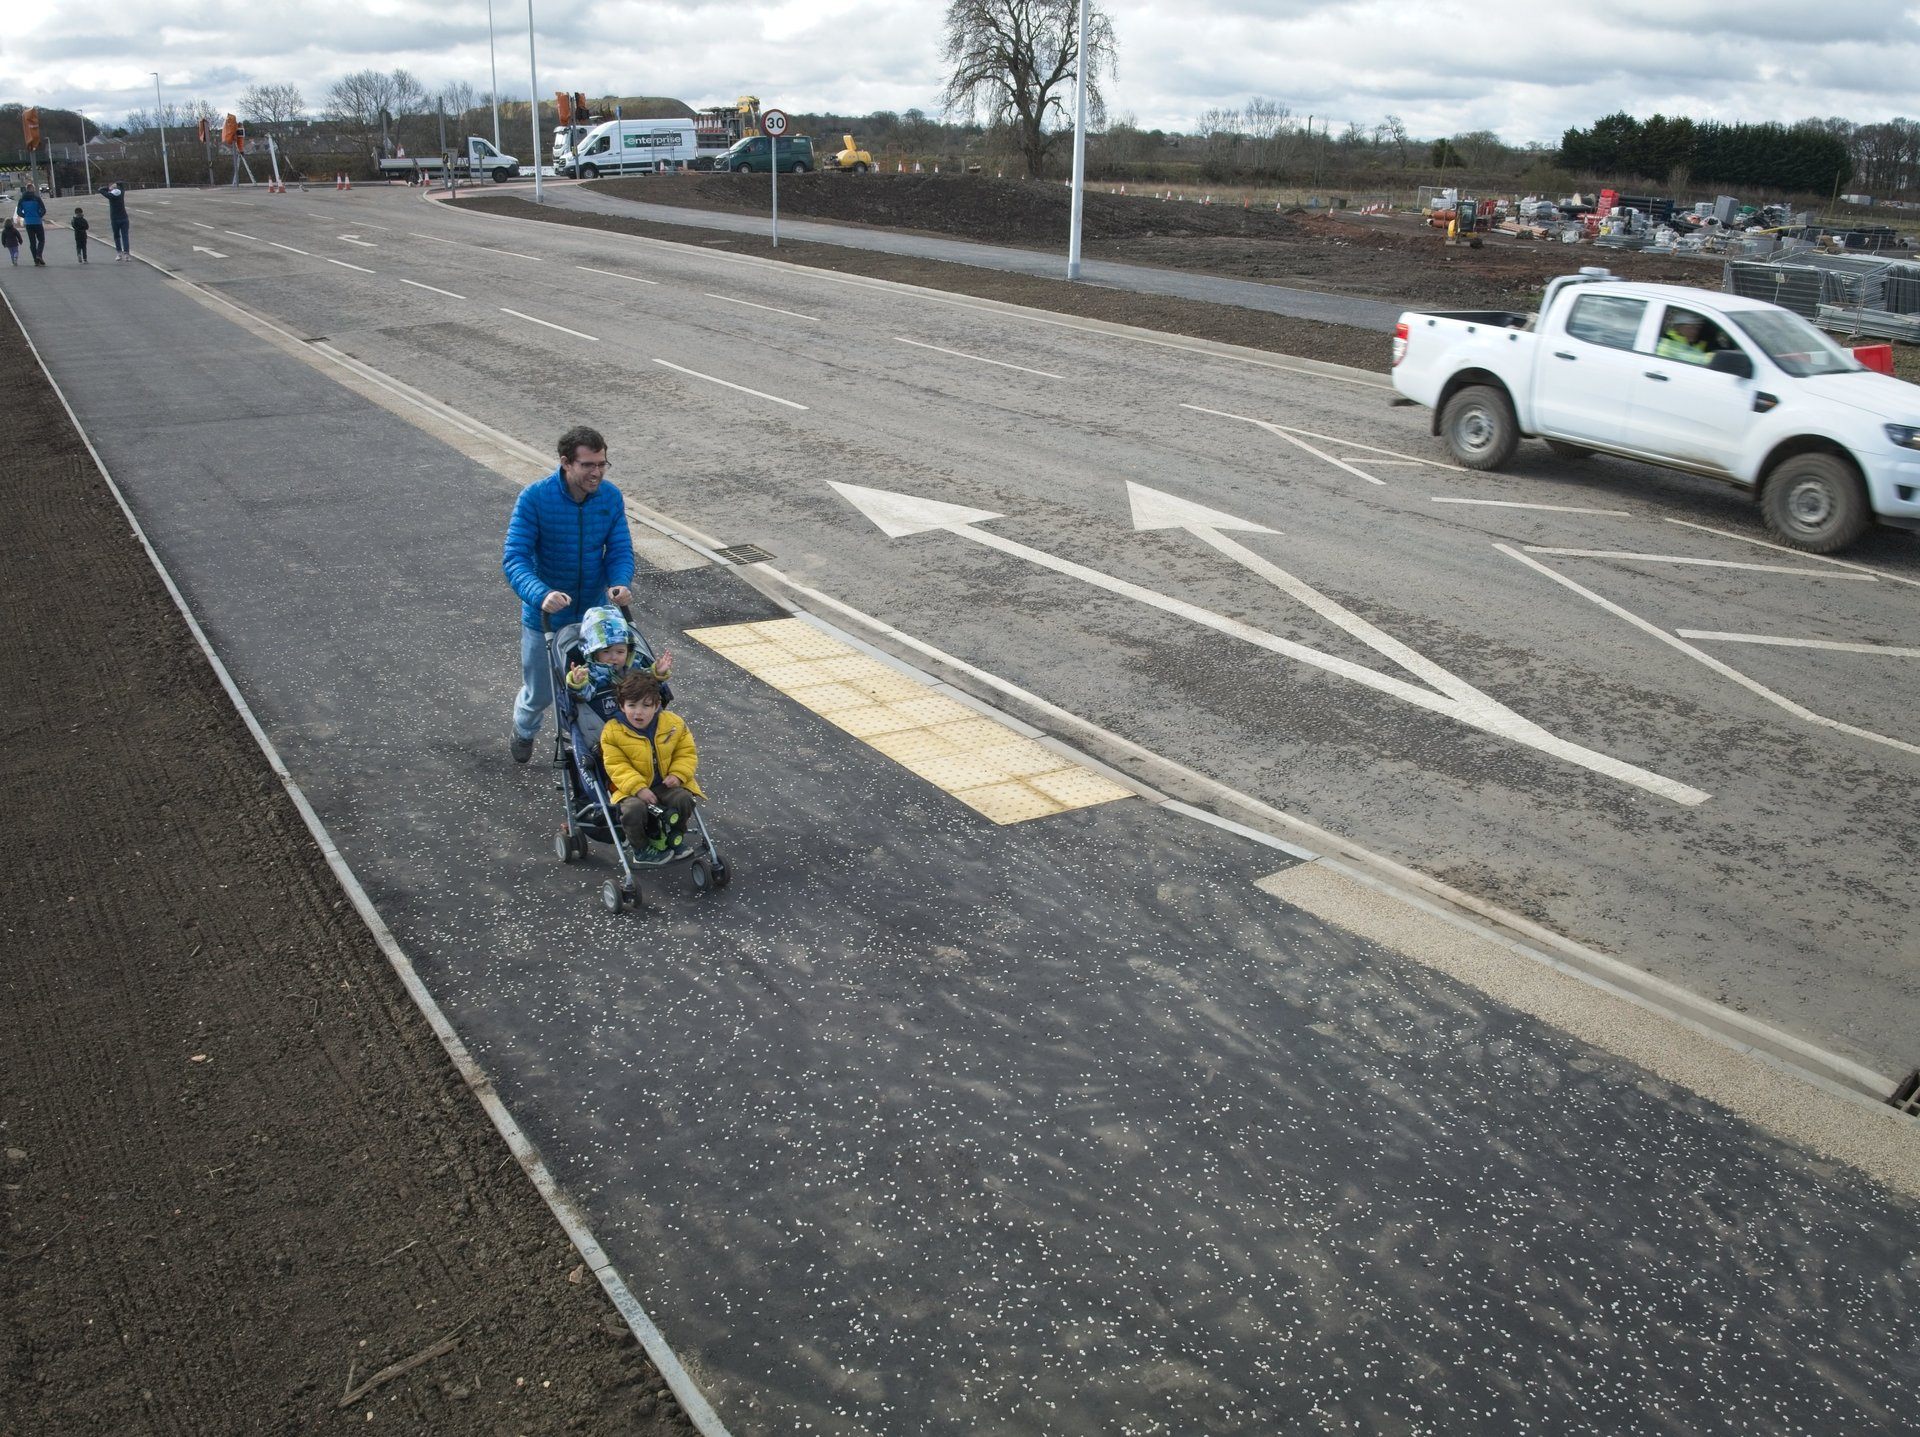 The road will connect Winchburgh to Edinburgh and beyond